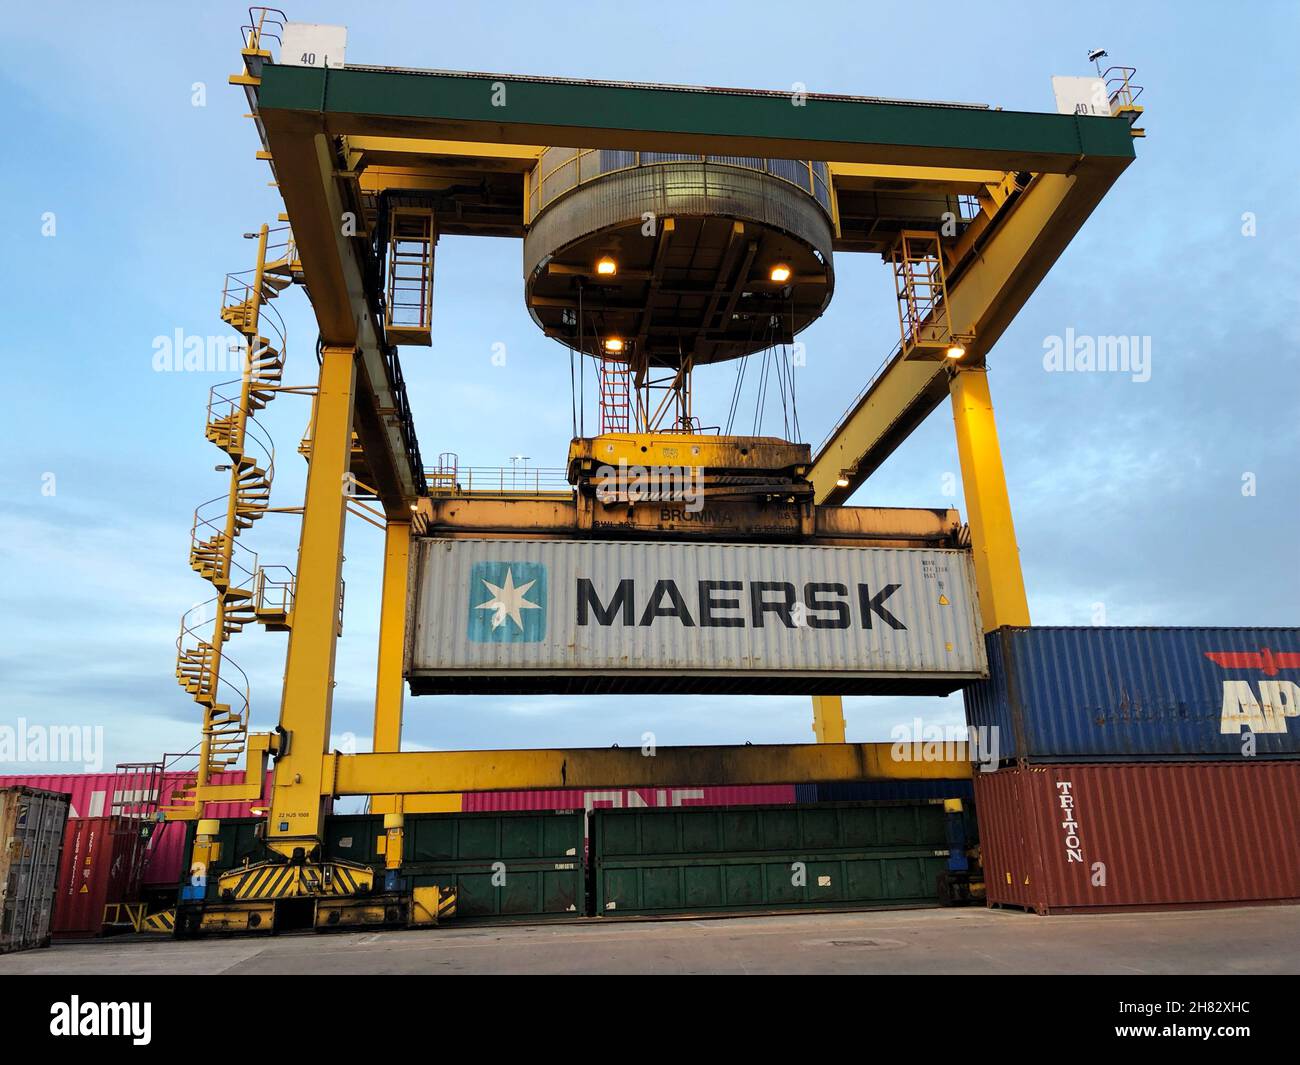 A Maersk shipping container being loaded onto a freight train by an overhead crane at a goods terminal or dock Stock Photo